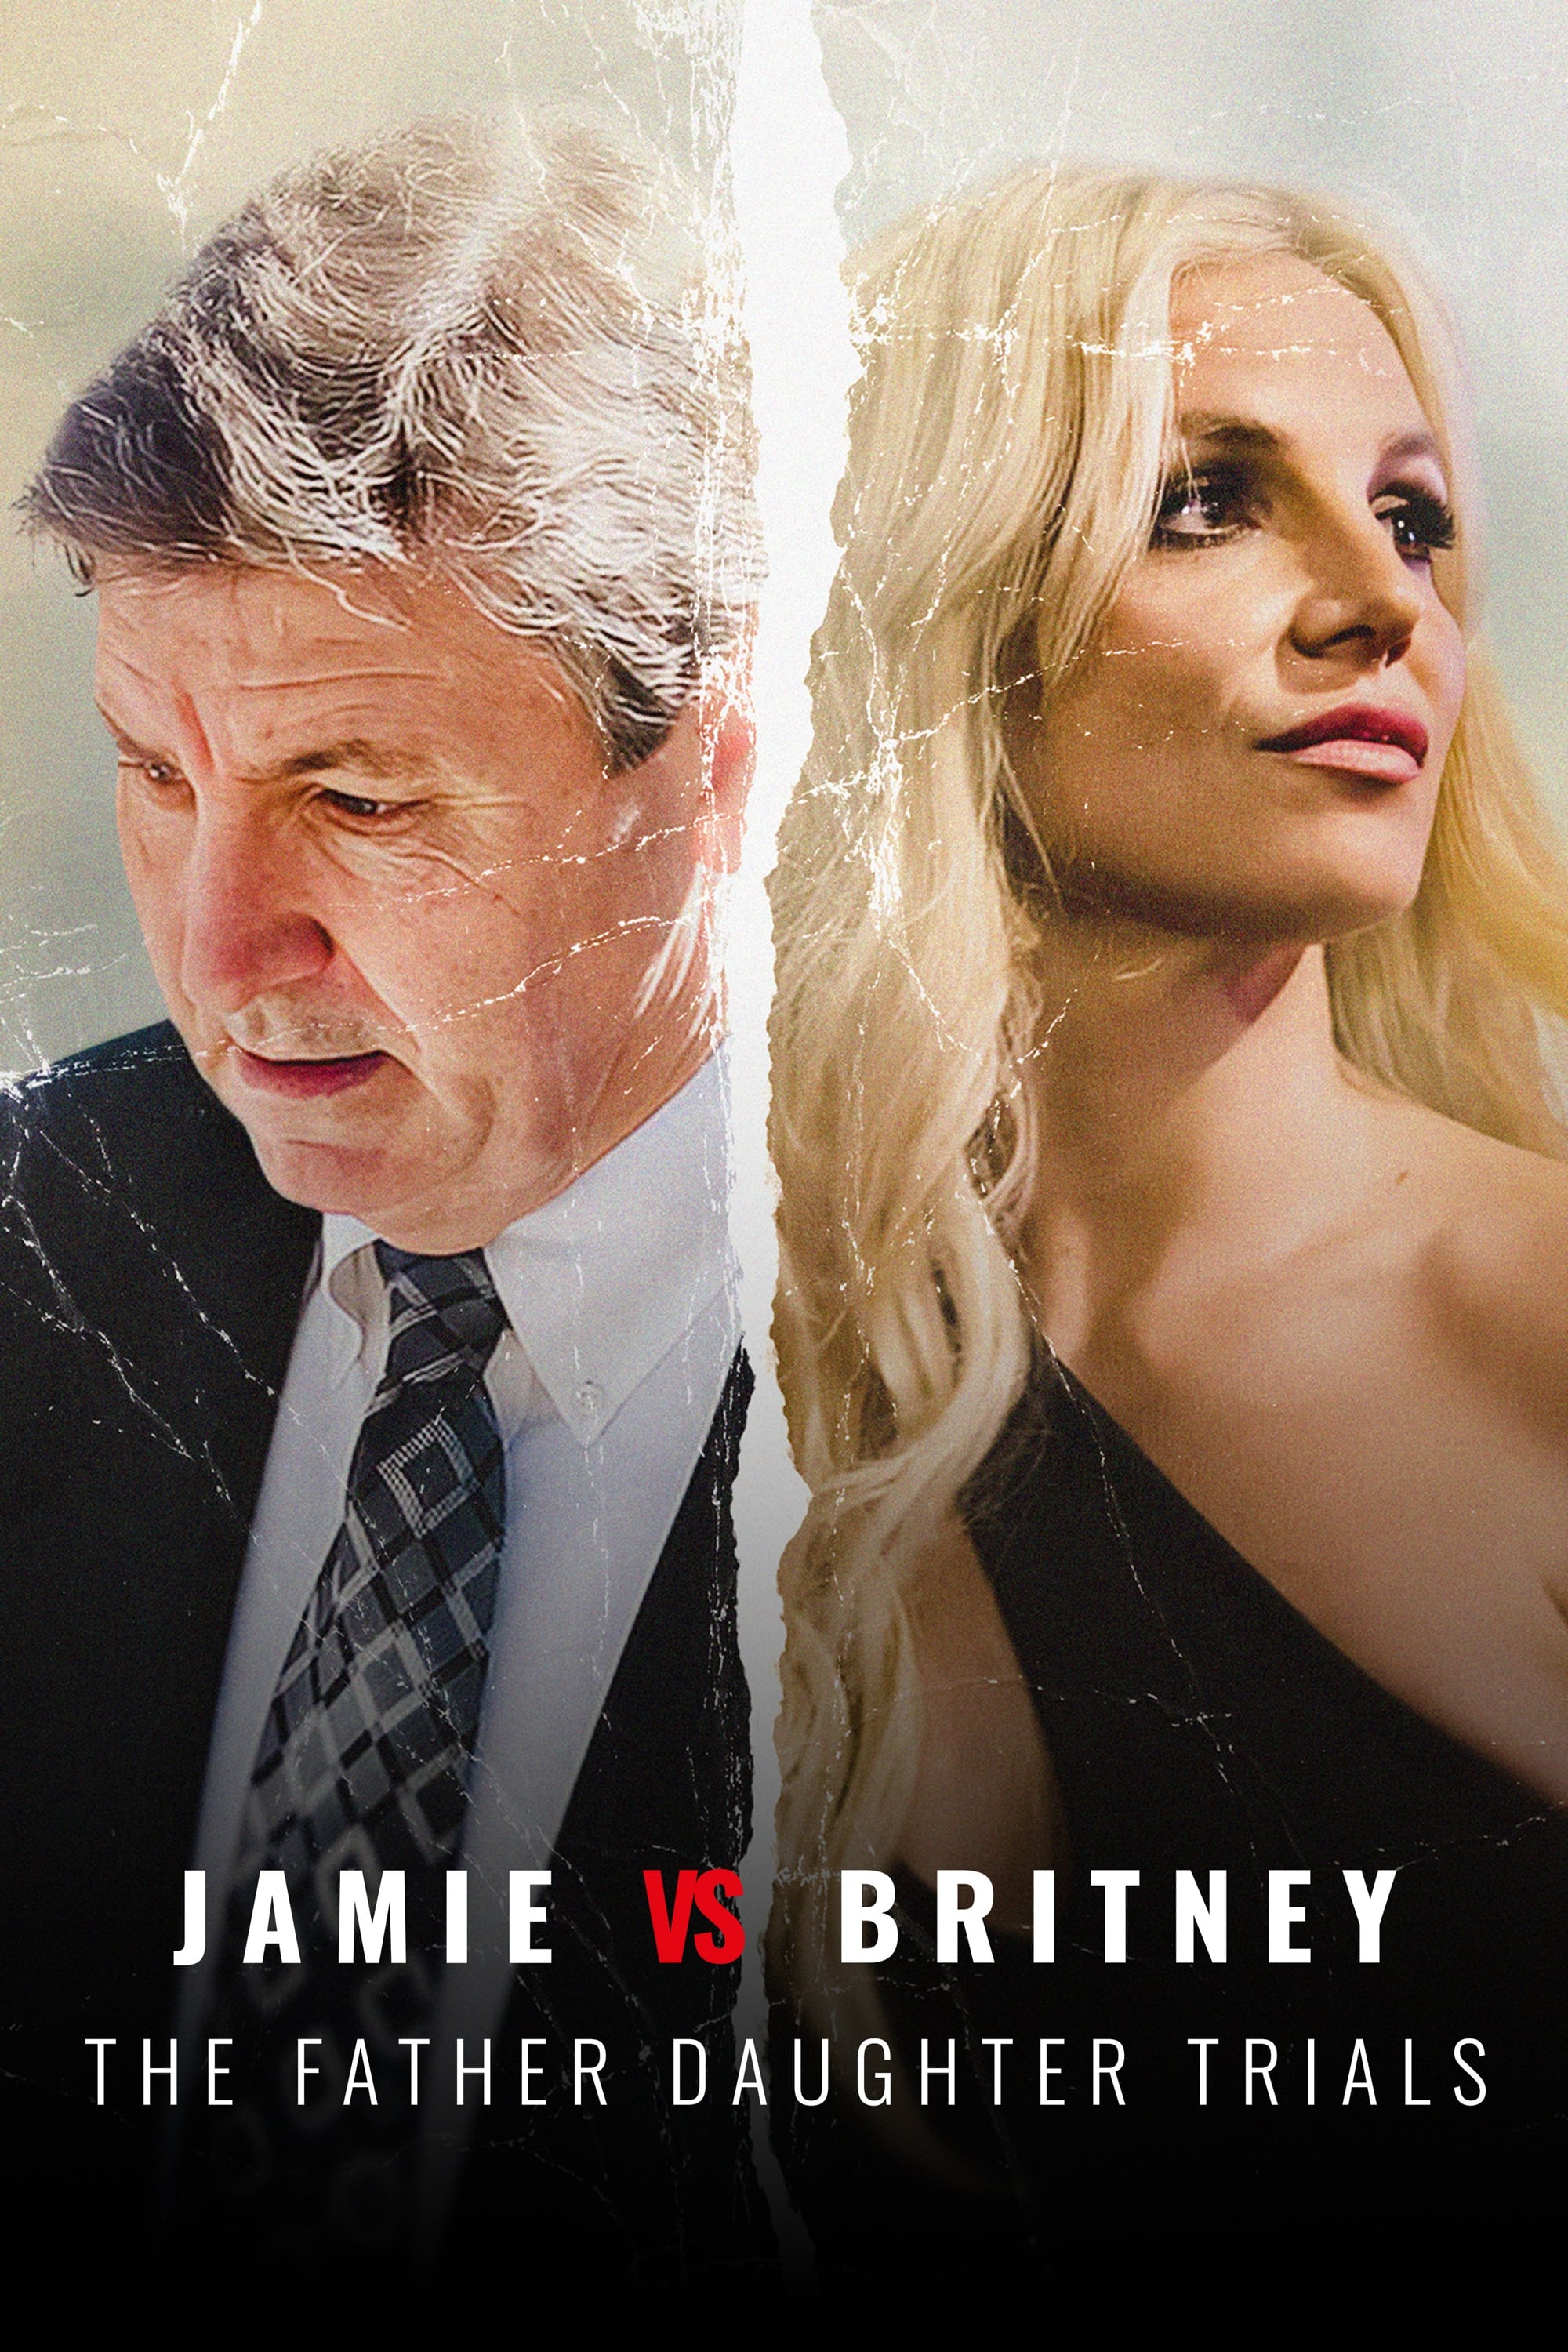 TV ratings for Jamie Vs Britney: The Father Daughter Trials in Corea del Sur. Discovery+ TV series